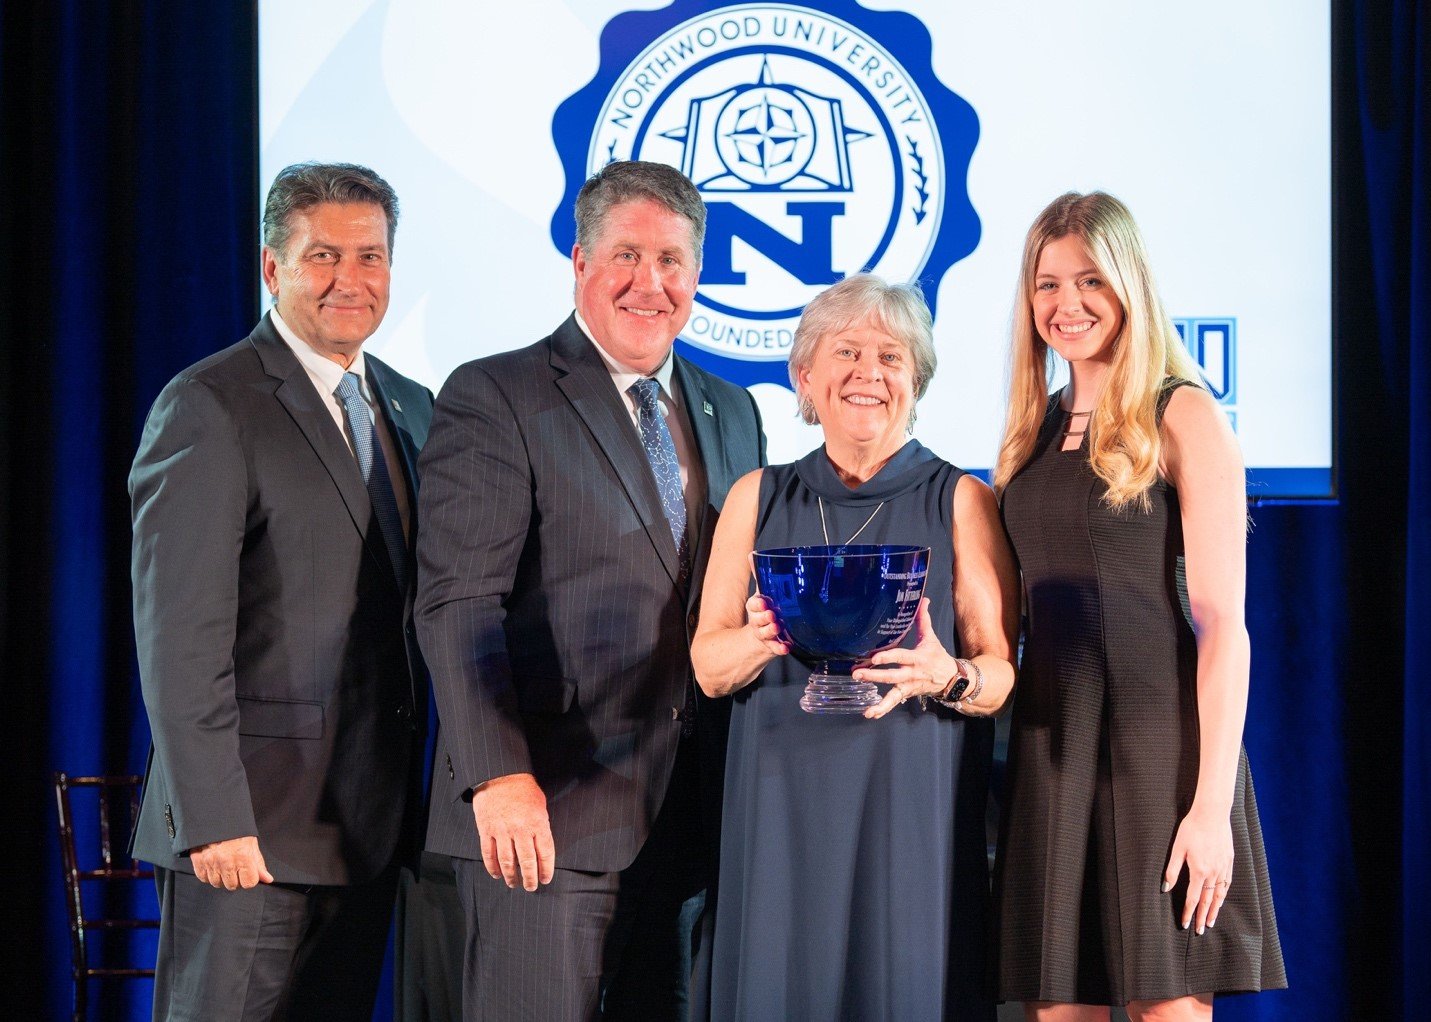  From left, Northwood University Board of Trustees Vice Chair Steve Madincea; President Kent MacDonald; Carol Williams, a former OBL who accepted this year’s award on behalf of 2022 OBL Jim Fitterling; and Kennedy Hatfield, a student who introduced W